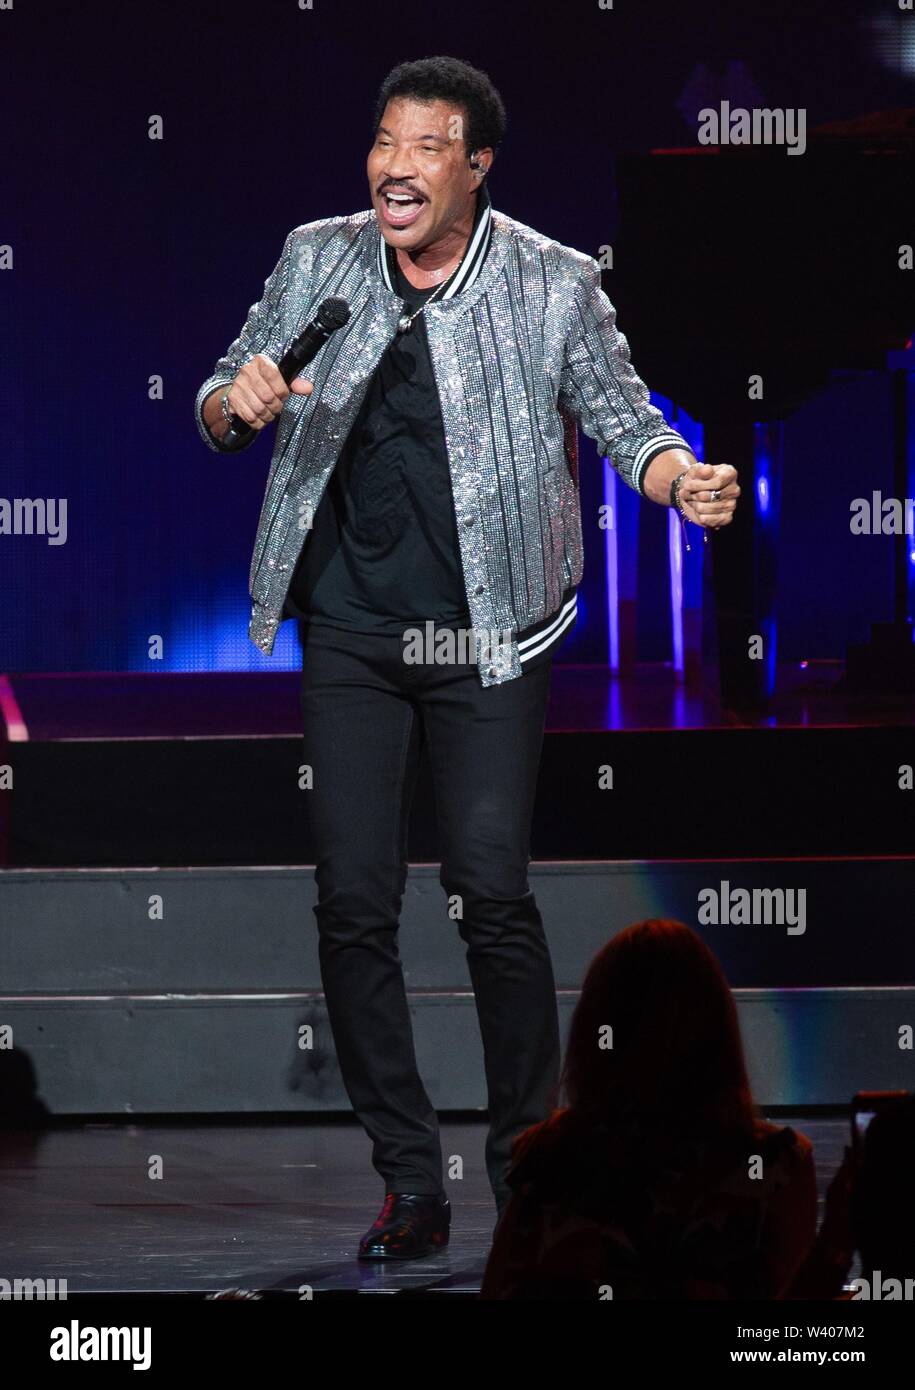 New York, NY, USA. 17th July, 2019. Lionel Richie on stage for Lionel  Richie 2019 Hello Tour, Radio City Music Hall, New York, NY July 17, 2019.  Credit: RCF/Everett Collection/Alamy Live News